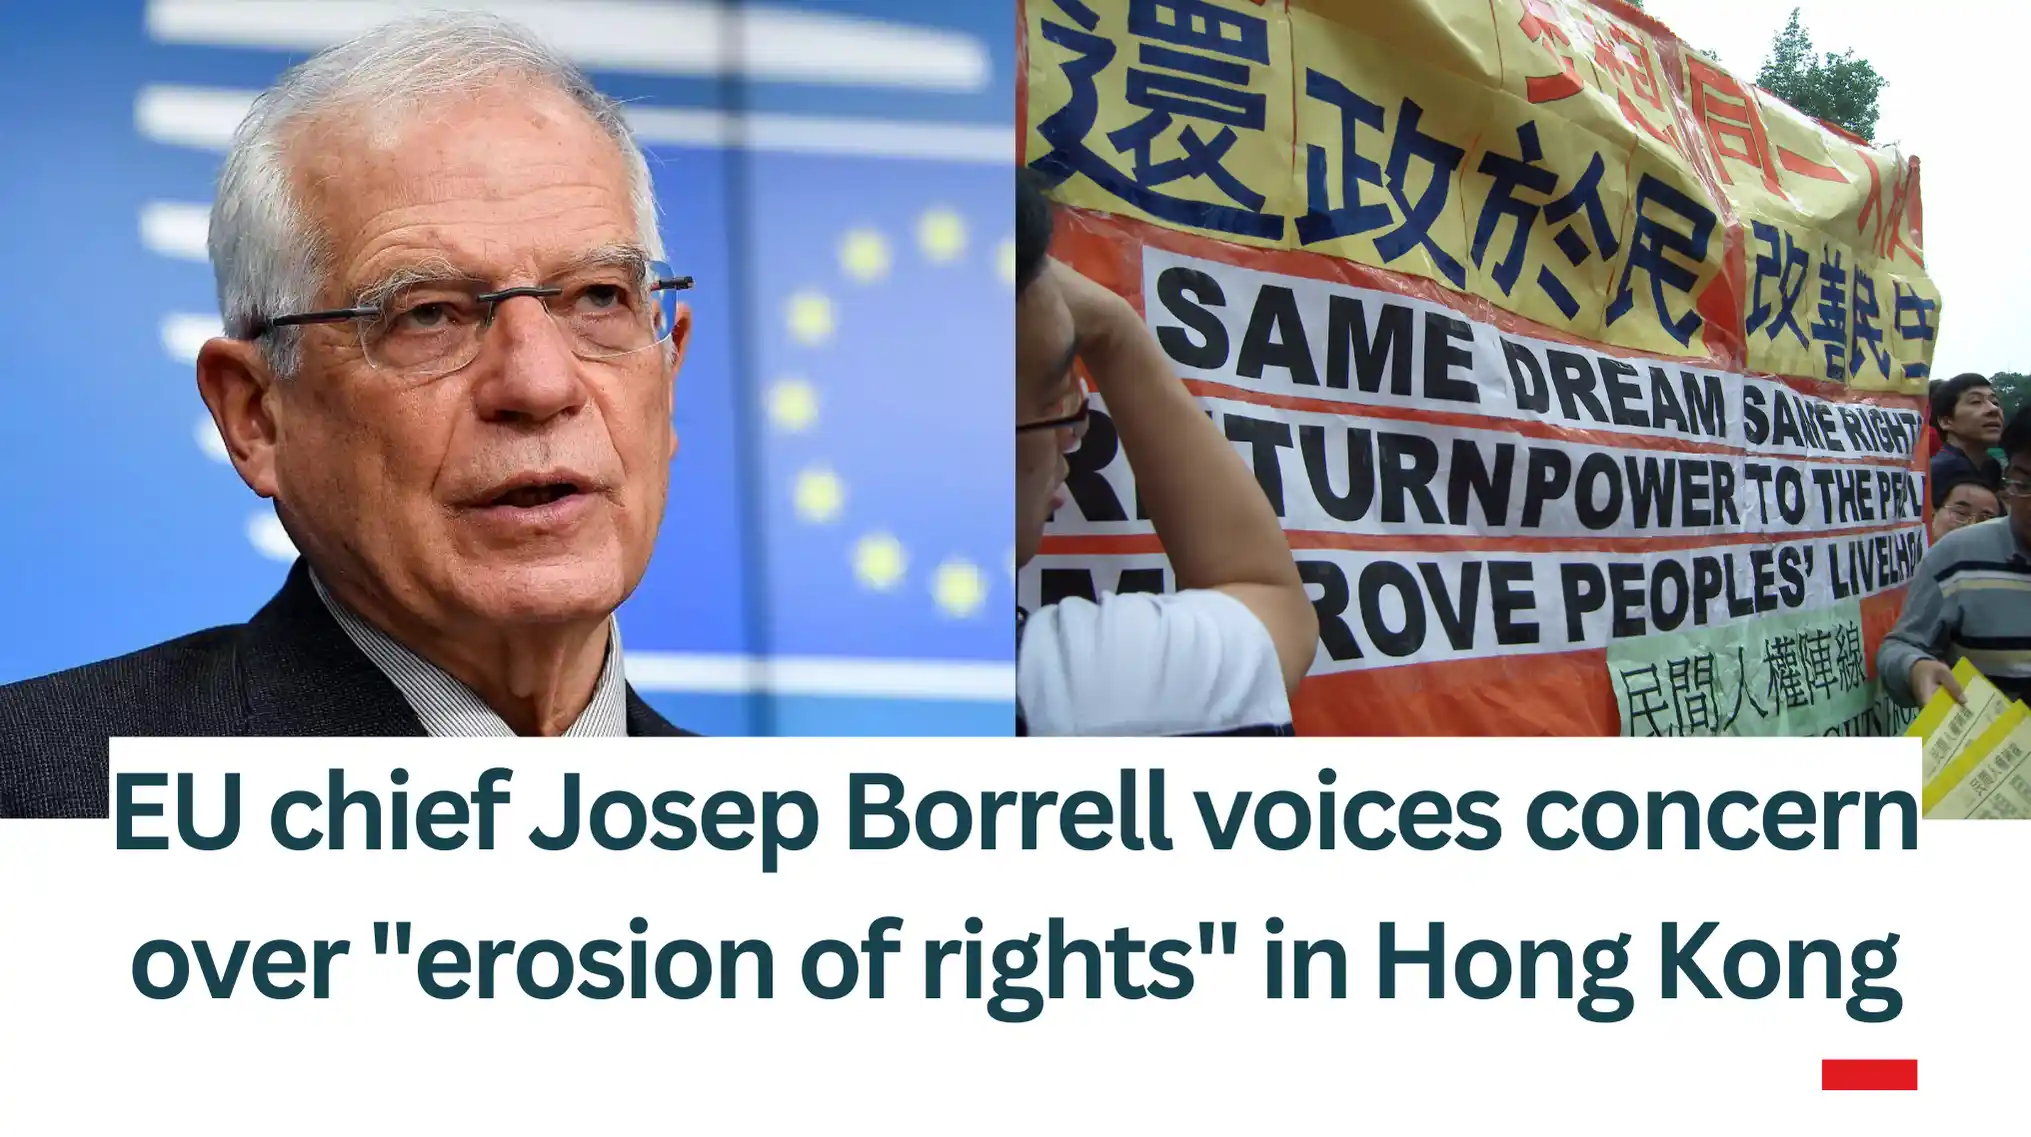 EU chief Josep Borrell voices concern over erosion of rights in Hong Kong